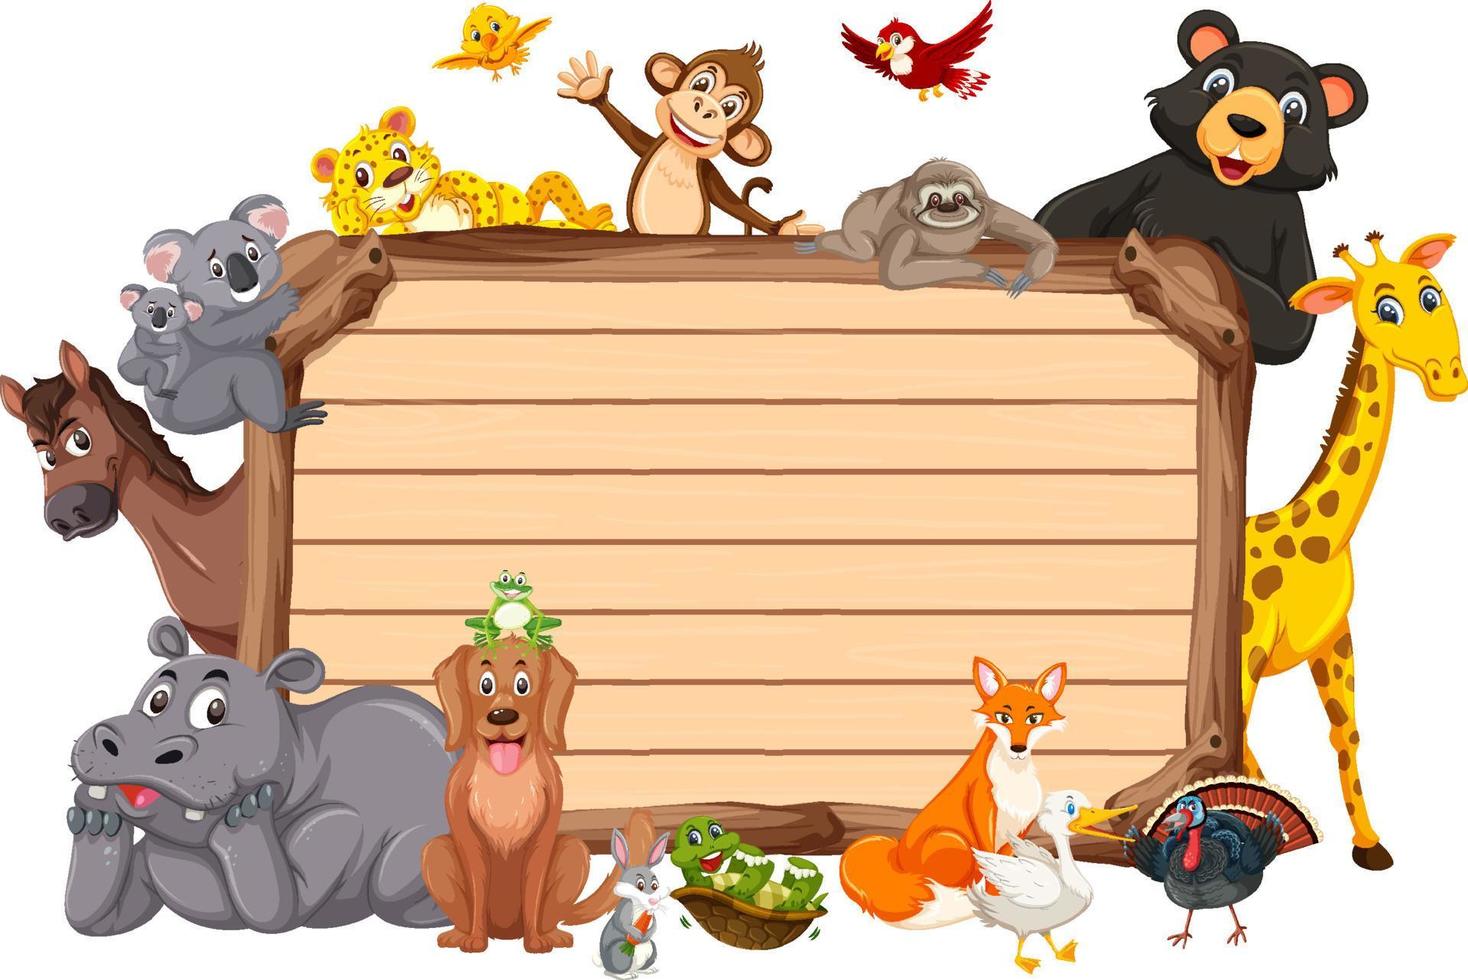 Empty wooden board with various wild animals vector